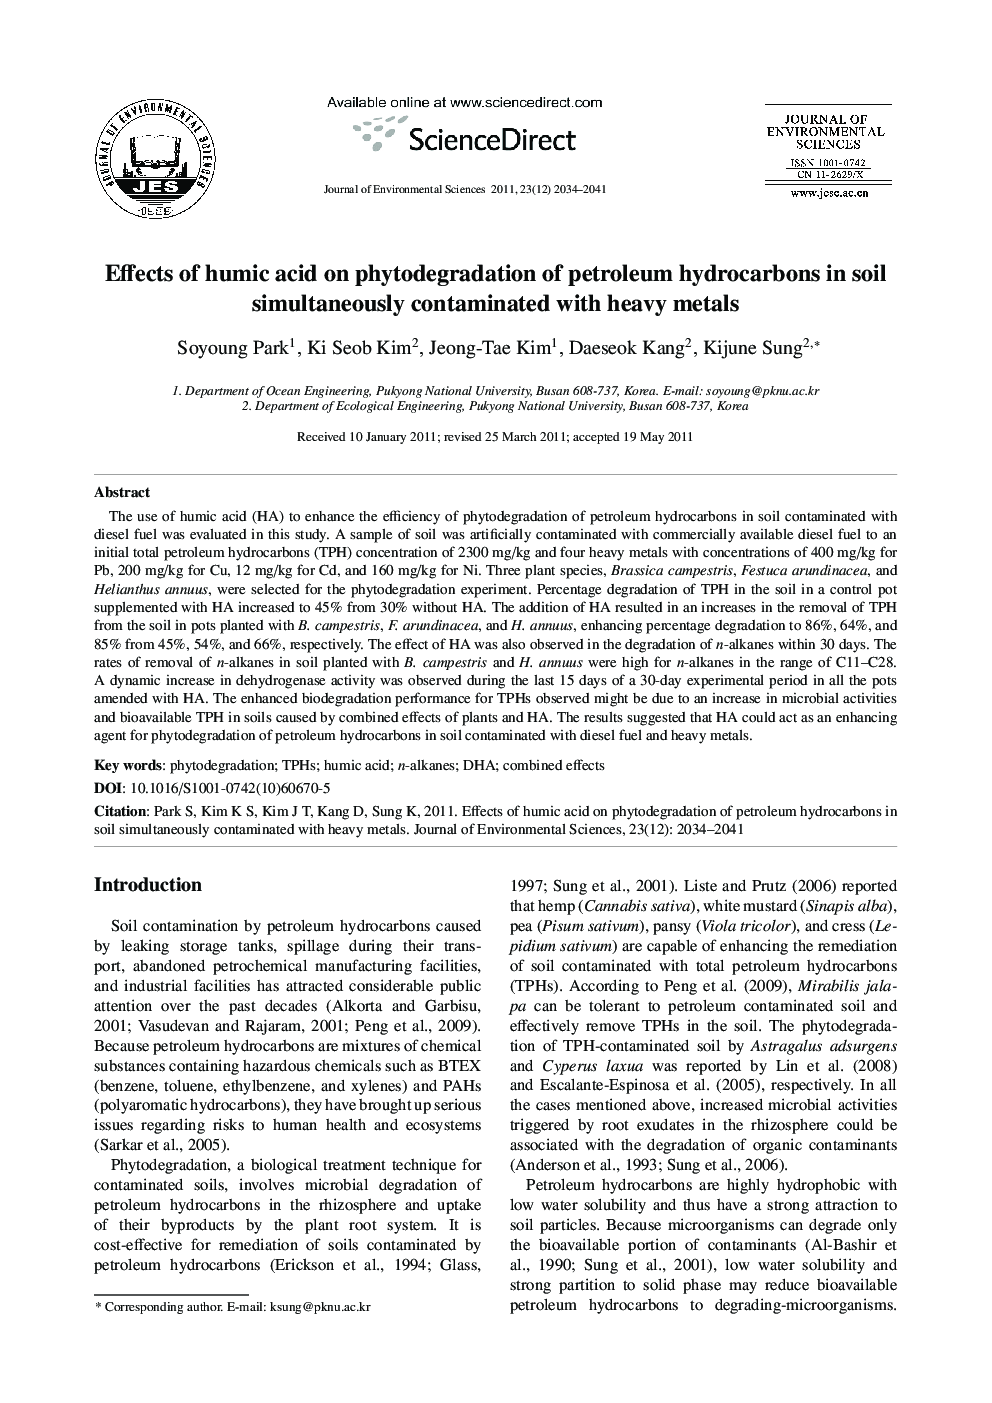 Effects of humic acid on phytodegradation of petroleum hydrocarbons in soil simultaneously contaminated with heavy metals